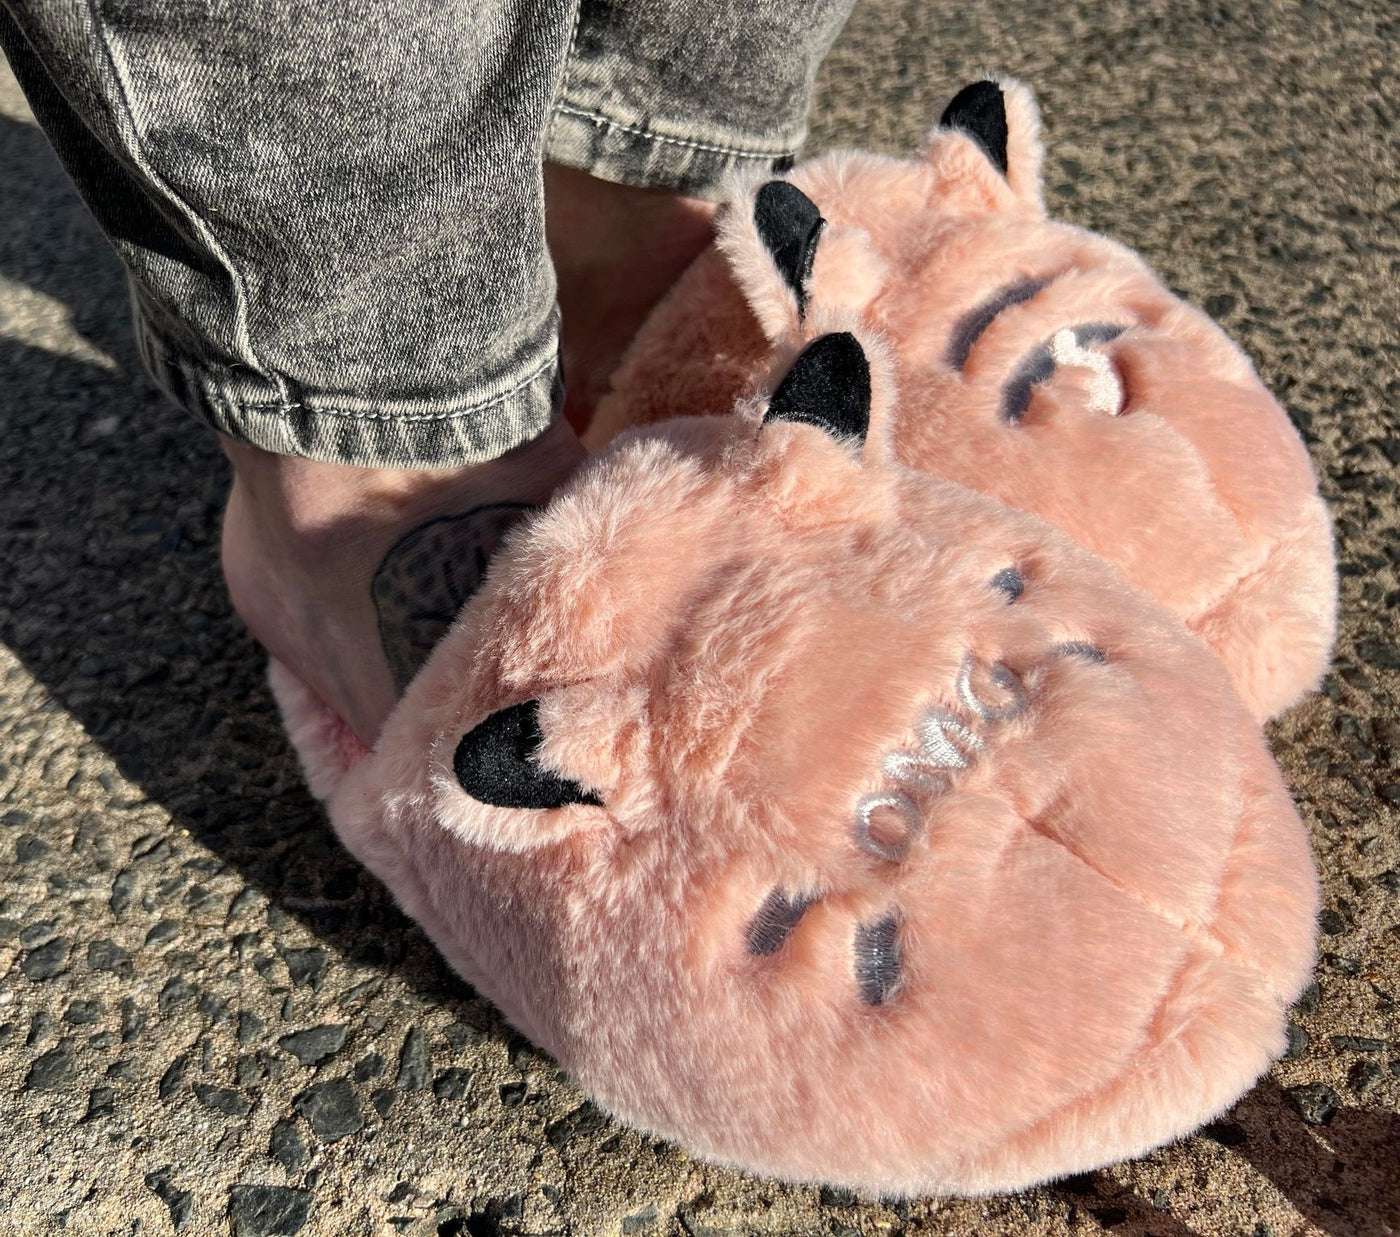 Soft Kitty Furry Slippers - Floss